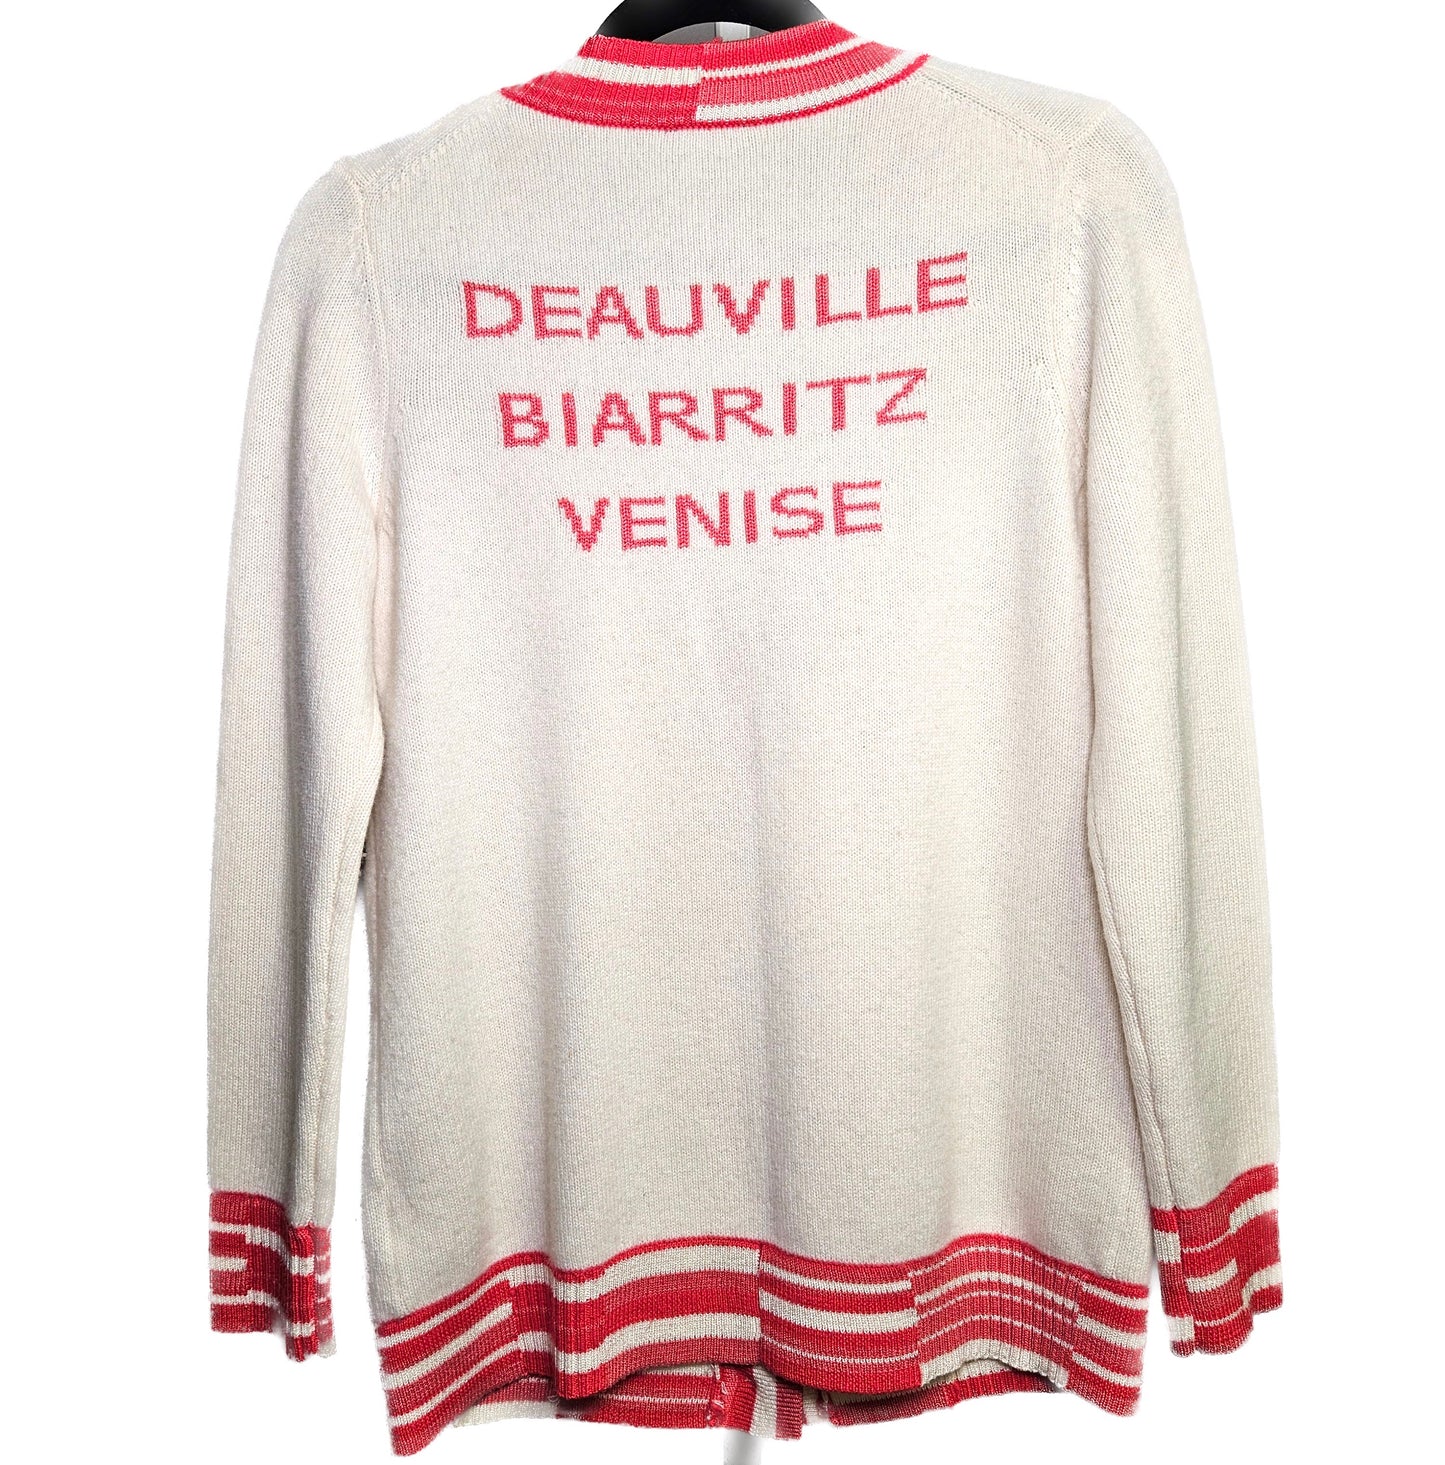 Chanel Sweater Deauville